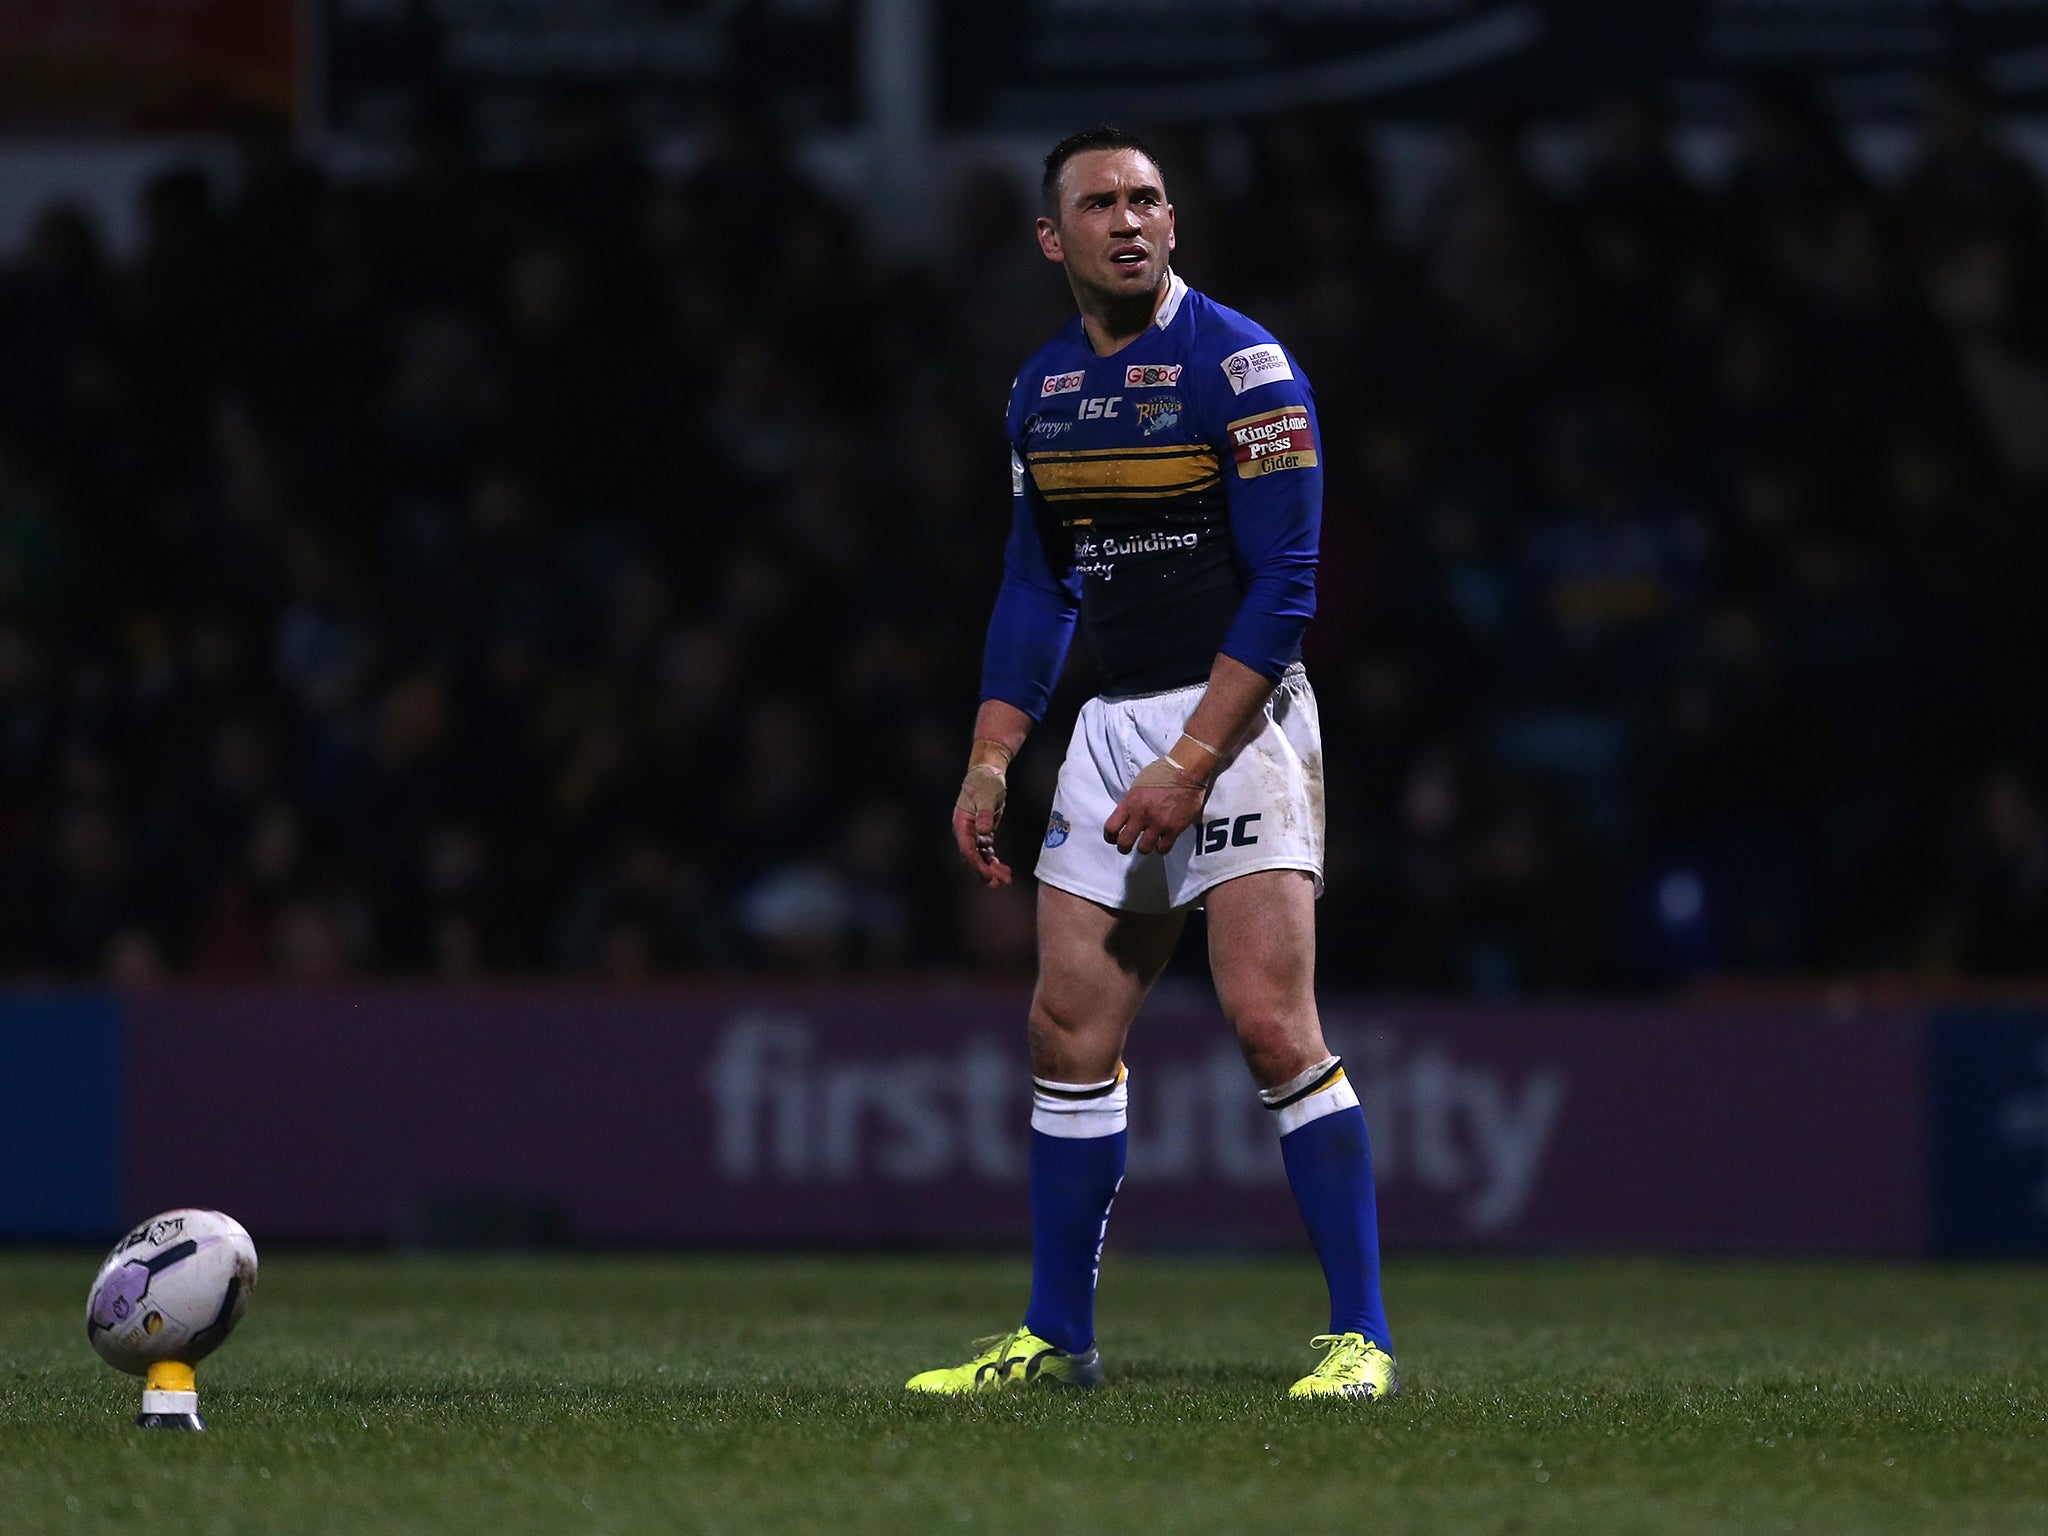 &#13;
Sinfield scored 3,967 points from 521 appearances for Leeds (Getty)&#13;